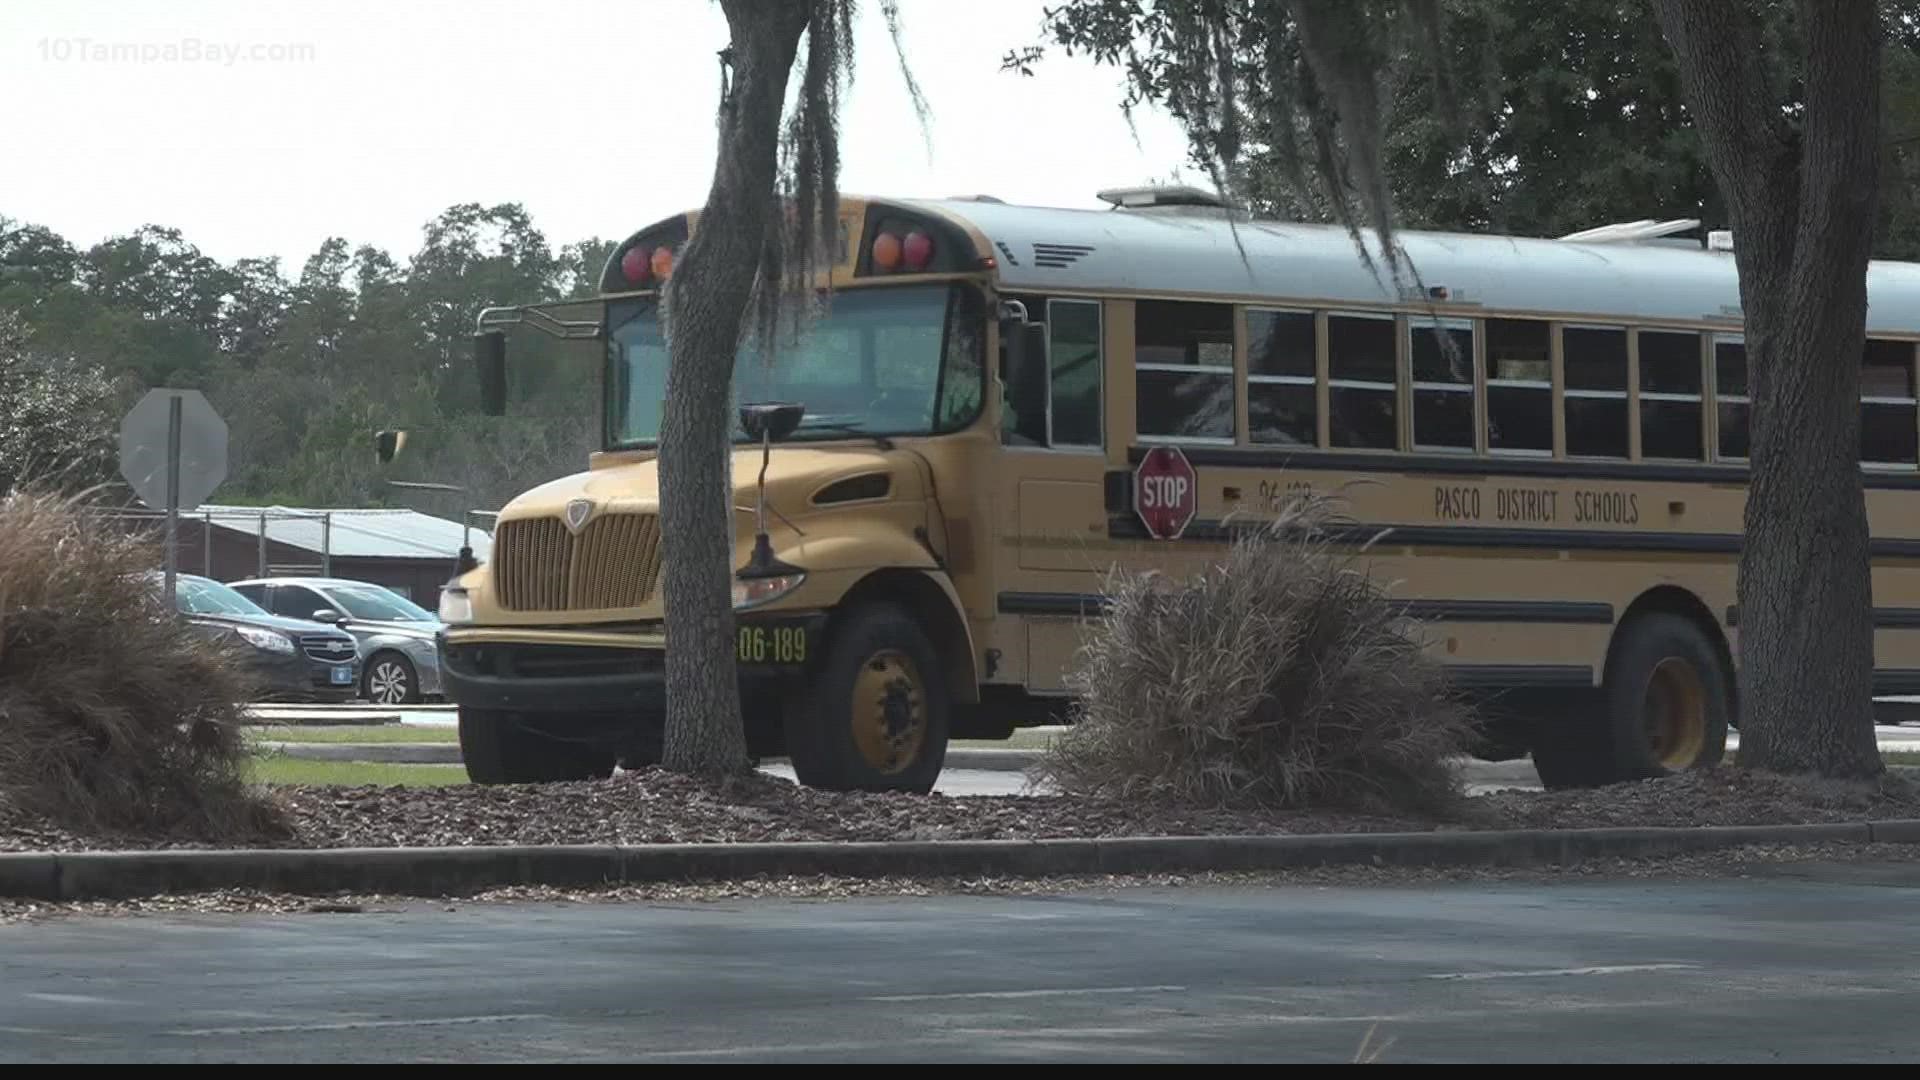 Many students are arriving at school late and being dropped off at home at times that are concerning for parents, according to the superintendent.